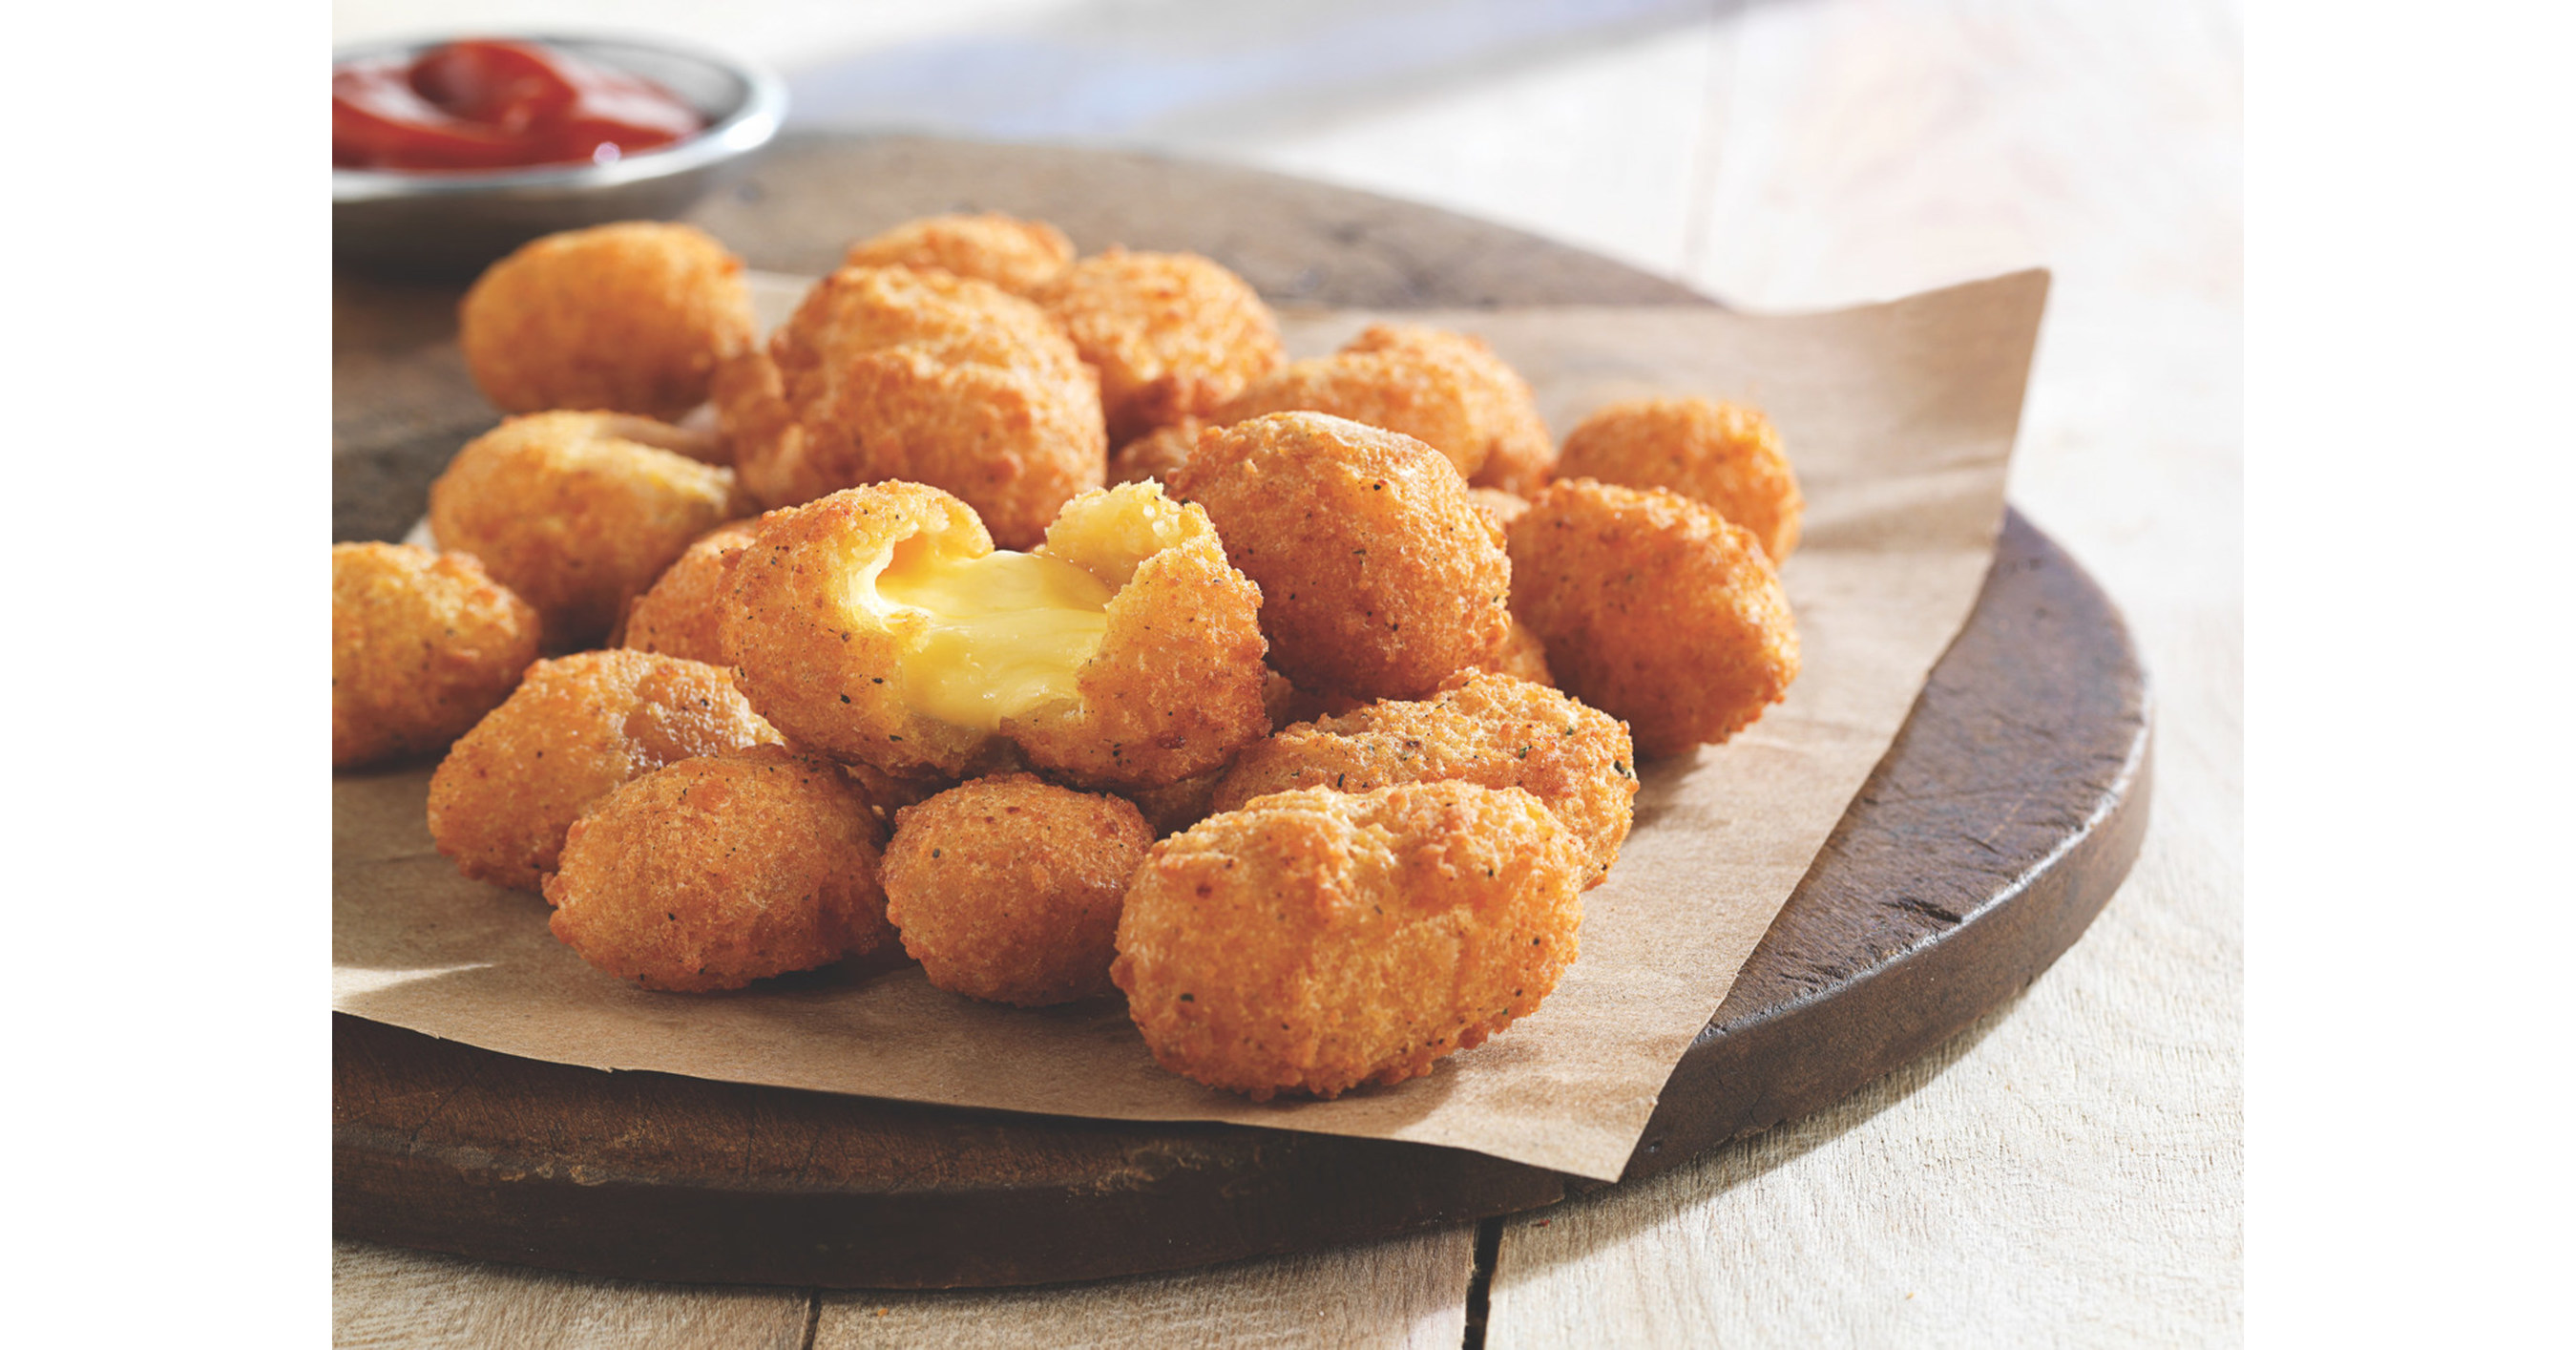 Culver's® Celebrates a Guest Favorite on National Cheese Curd Day